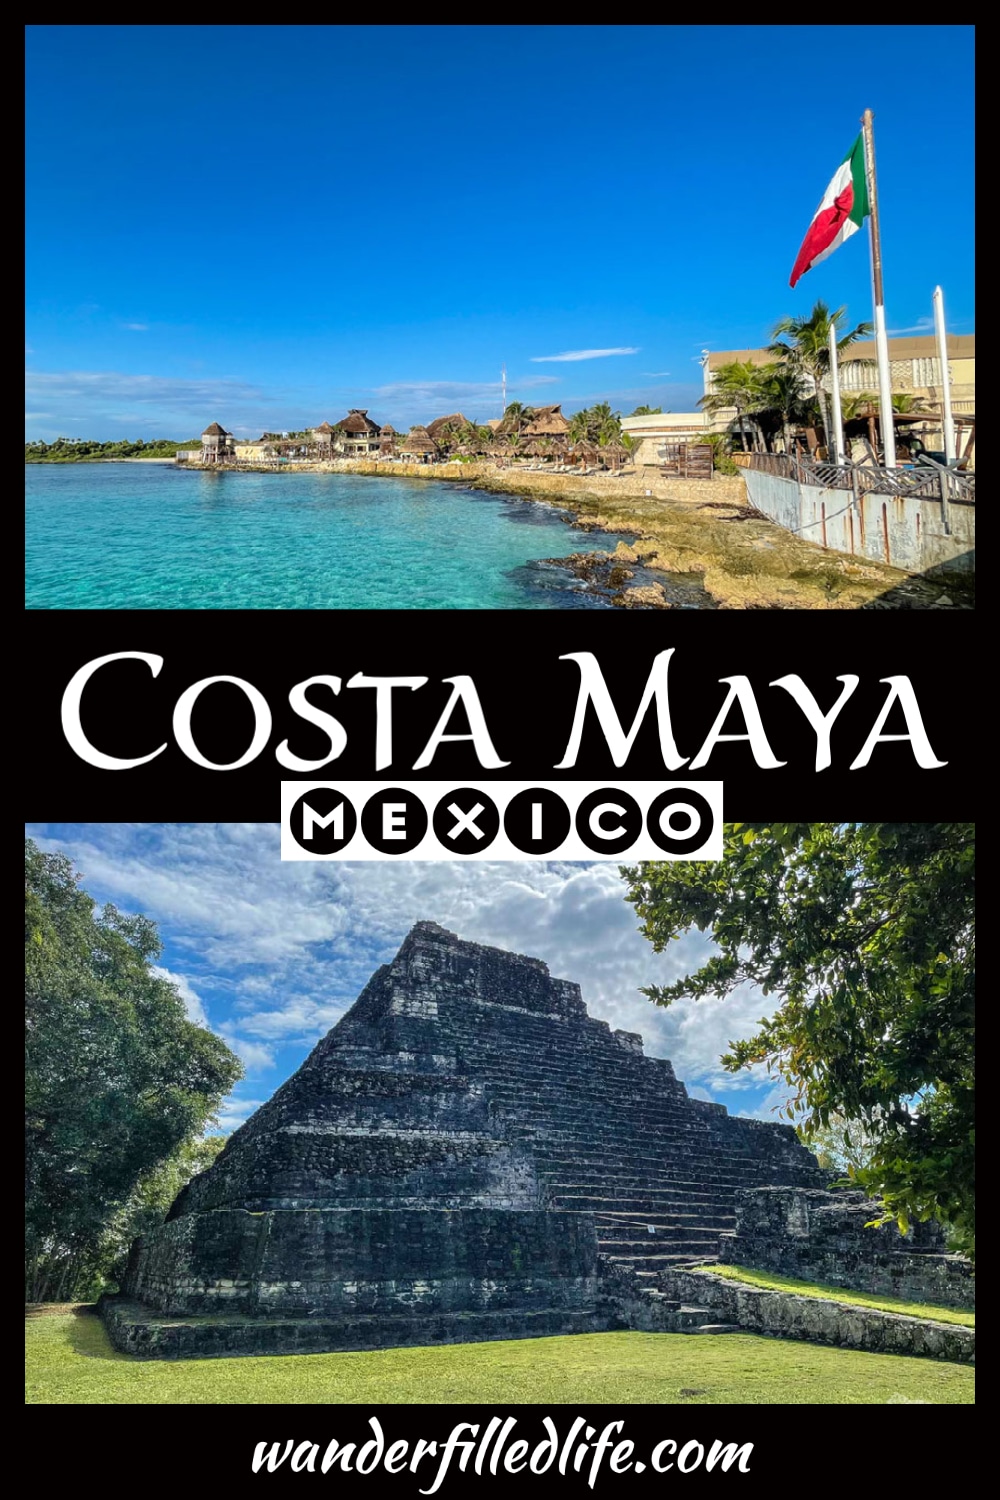 Our tips for visiting the Costa Maya, Mexico cruise port and how to enjoy a half-day excursion to the Chacchoben Mayan ruins.